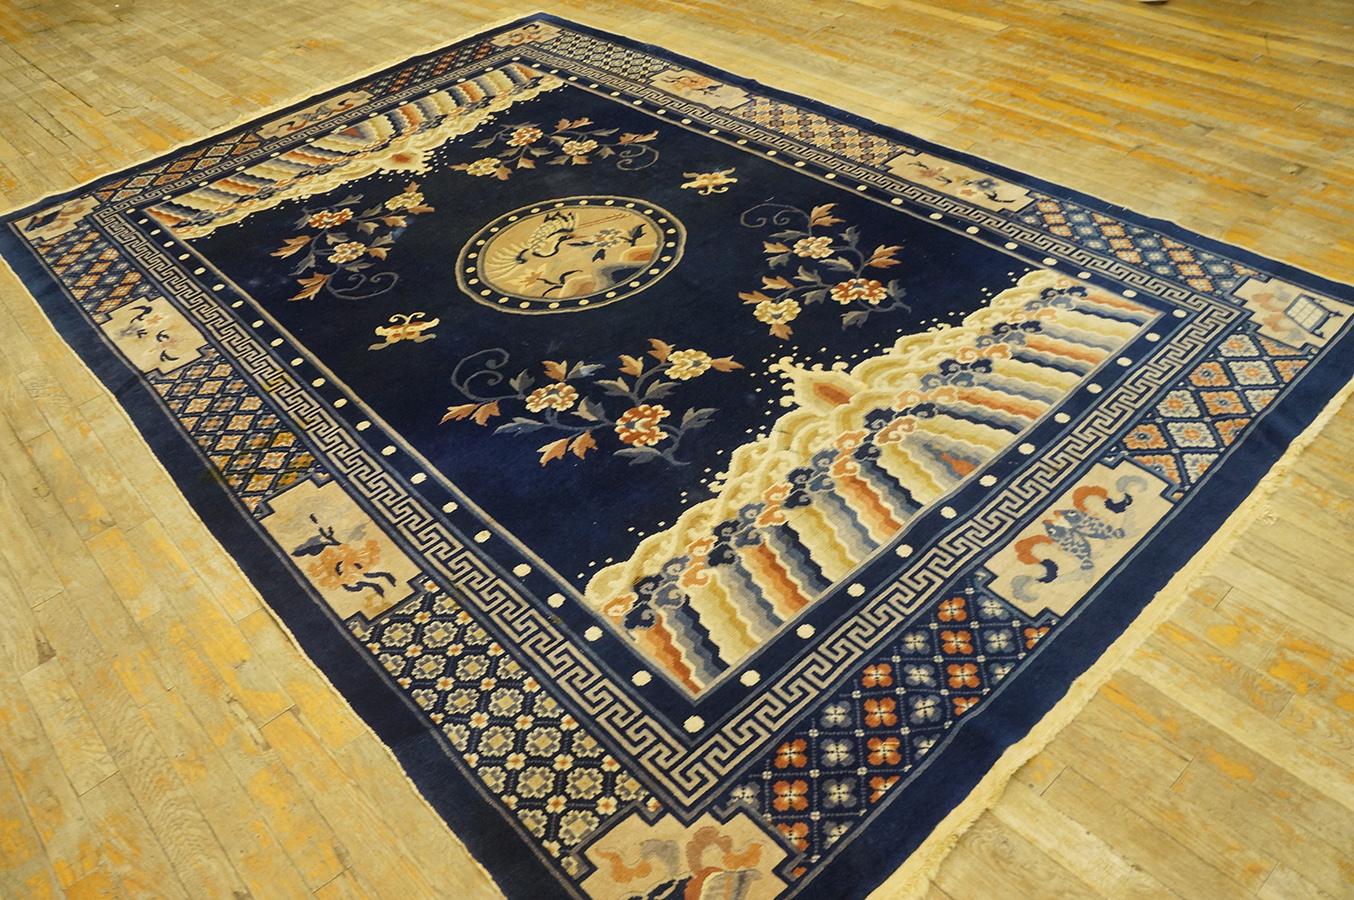 1920s Chinese Peking Carpet ( 6' 1'' x 9' - 185 x 275 cm ) In Excellent Condition For Sale In New York, NY